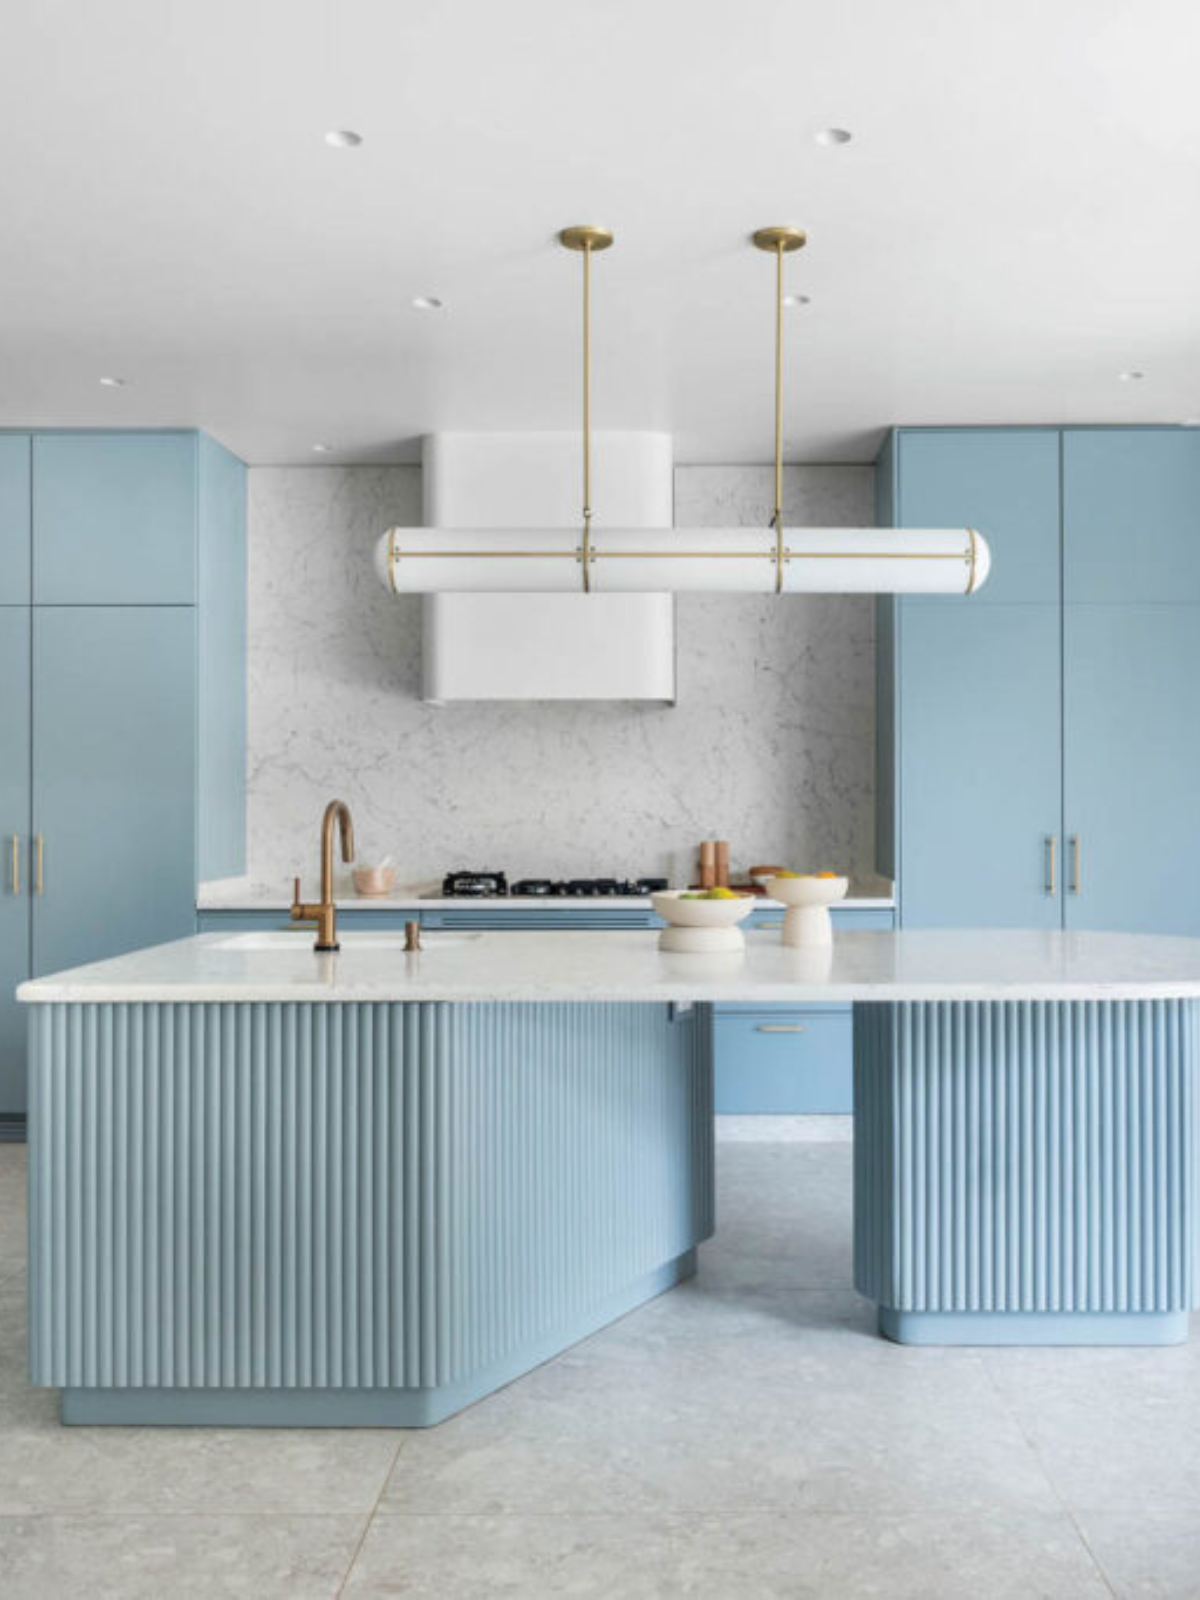 kitchen showing an island counter and millwork in powder blue finish, pendant light and gold finish plumbing fixtures